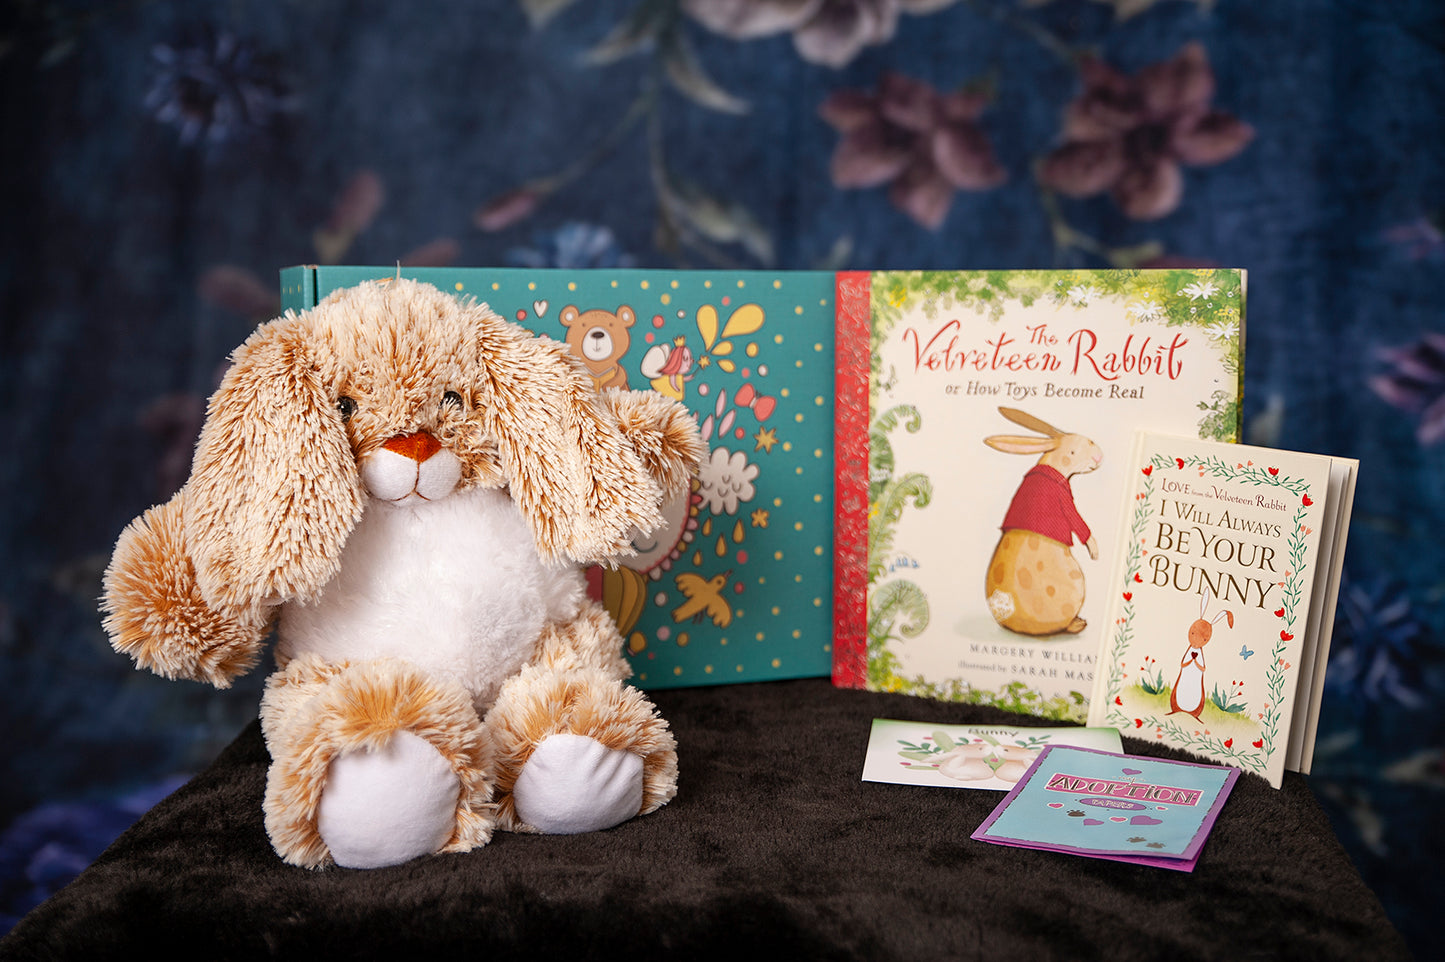 Velveteen Rabbit Stuffing Kit and Book Set by Book and Bear